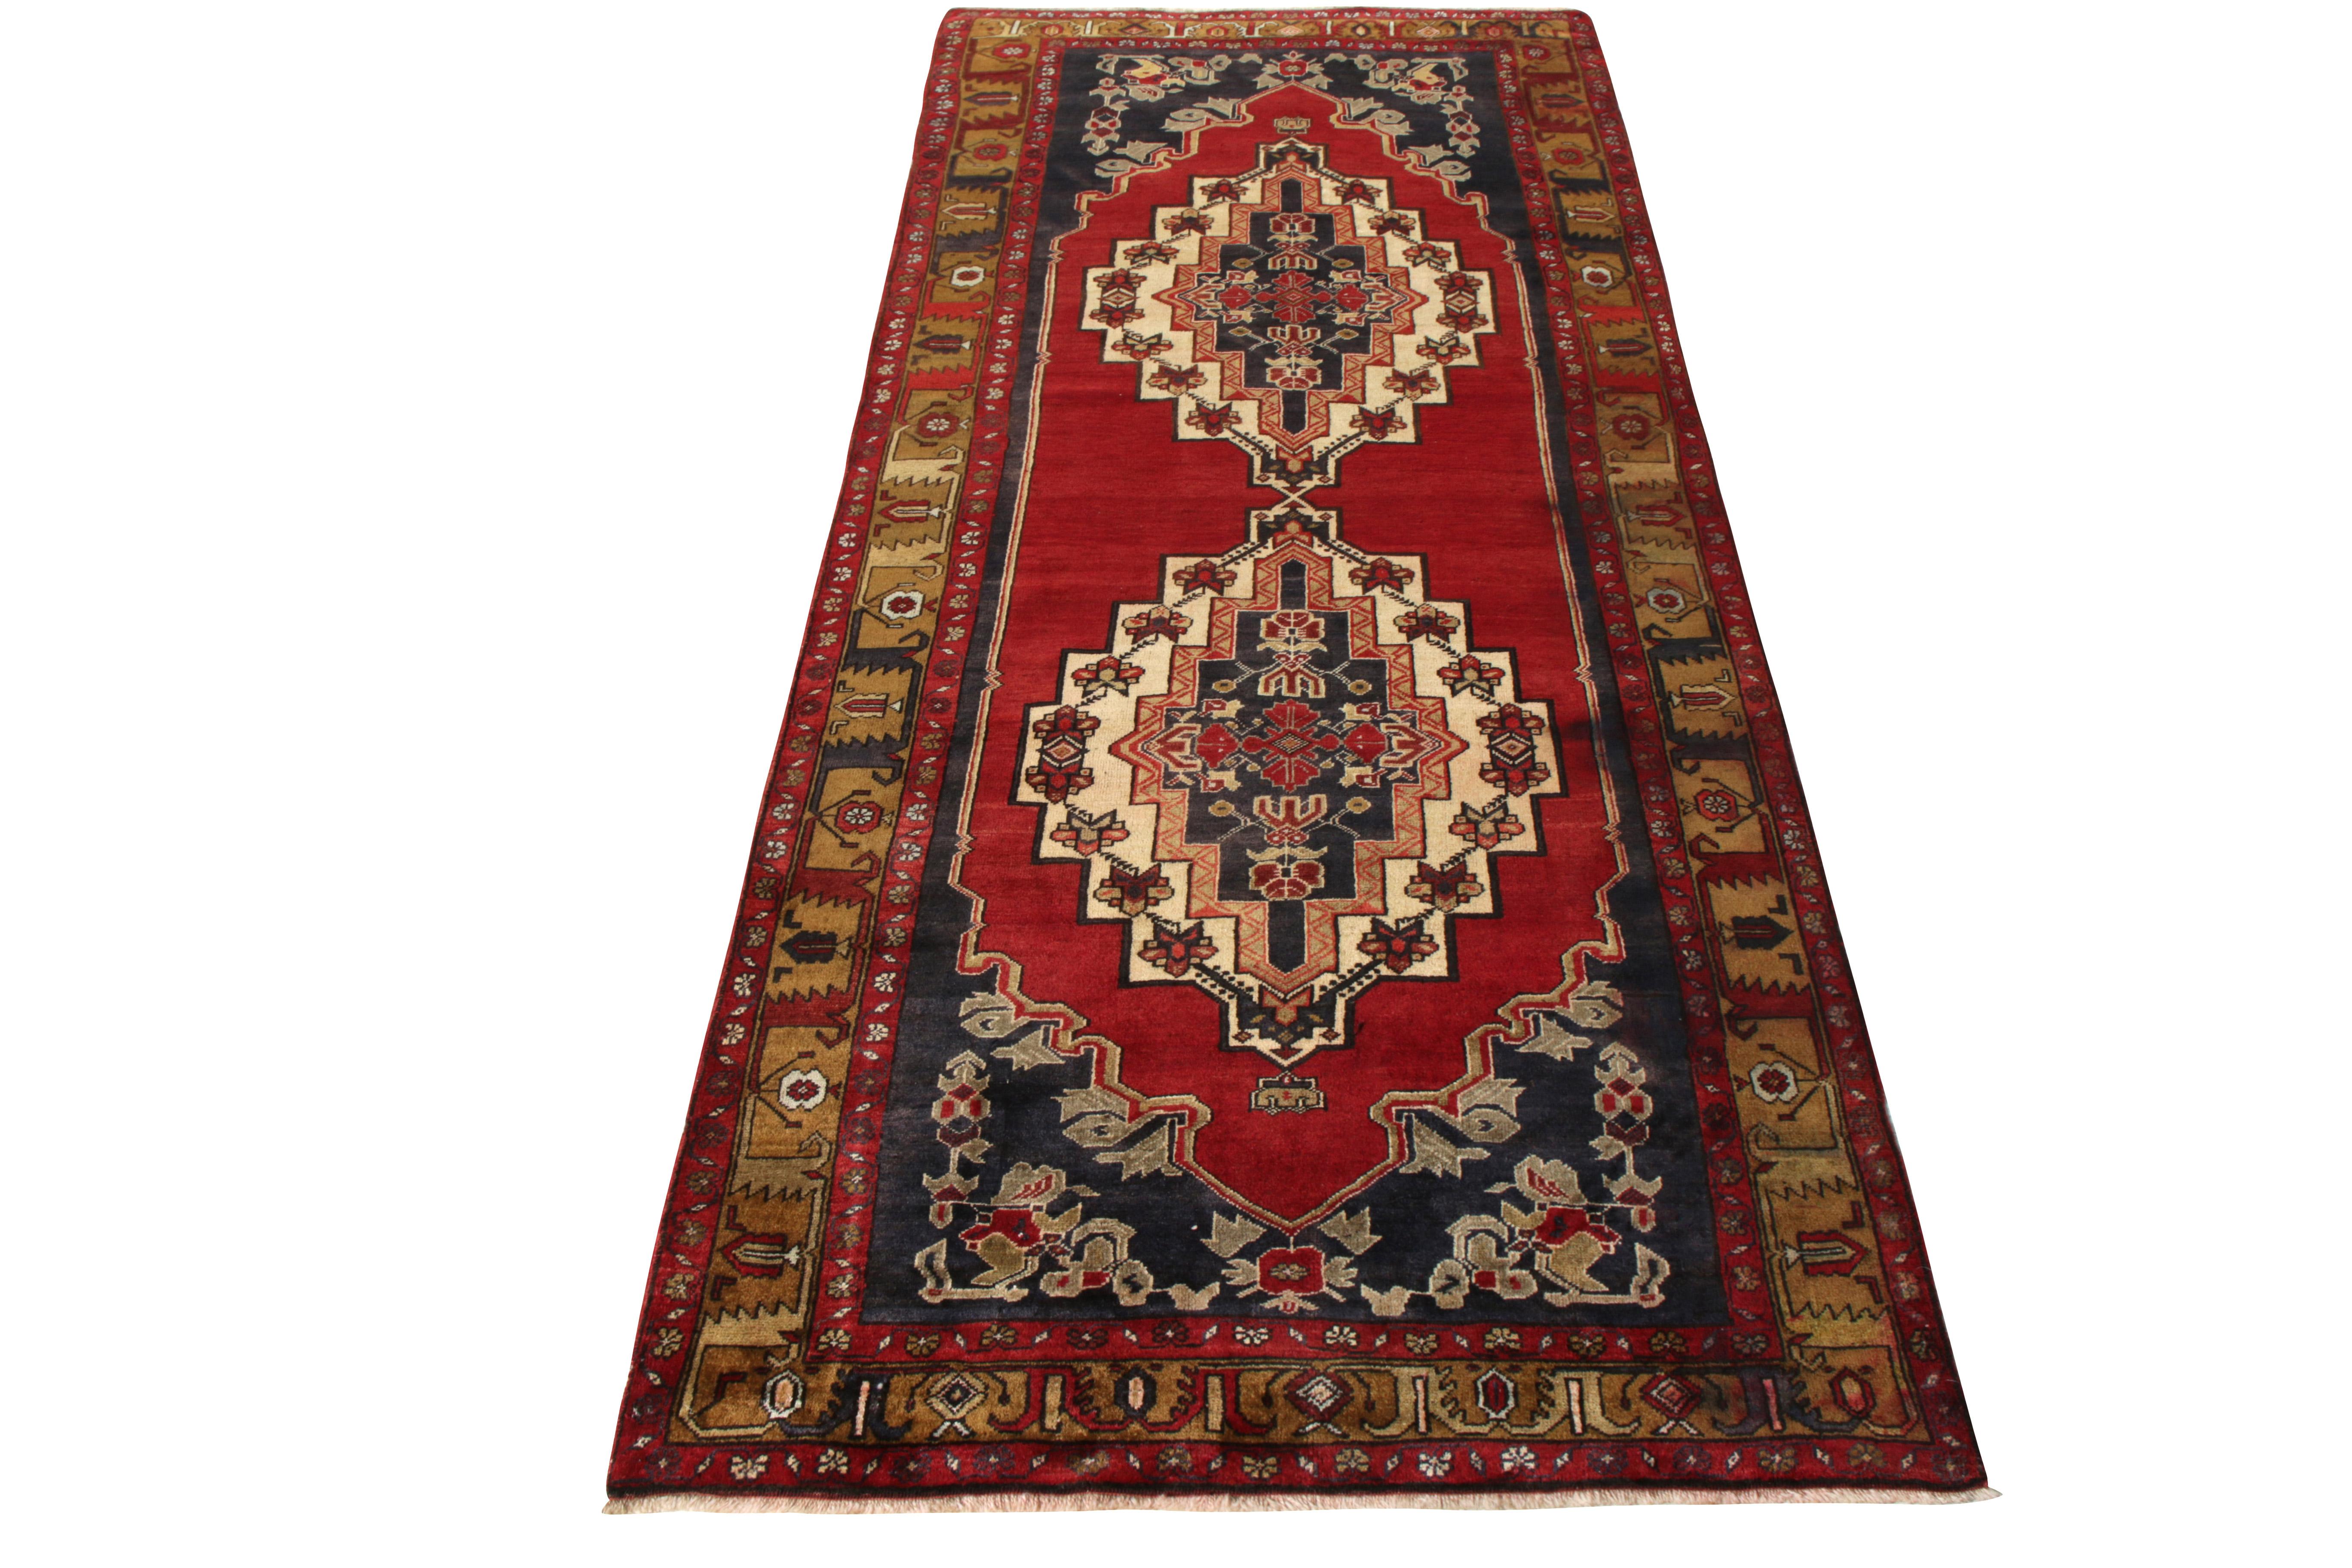 Hand knotted in wool originating from Turkey circa 1950-1960, a vintage 5x12 Konya rug joining Rug & Kilim’s coveted Antique & Vintage Collection. The rug emanates the tribal instincts this regional Turkish style is known for through an engaging